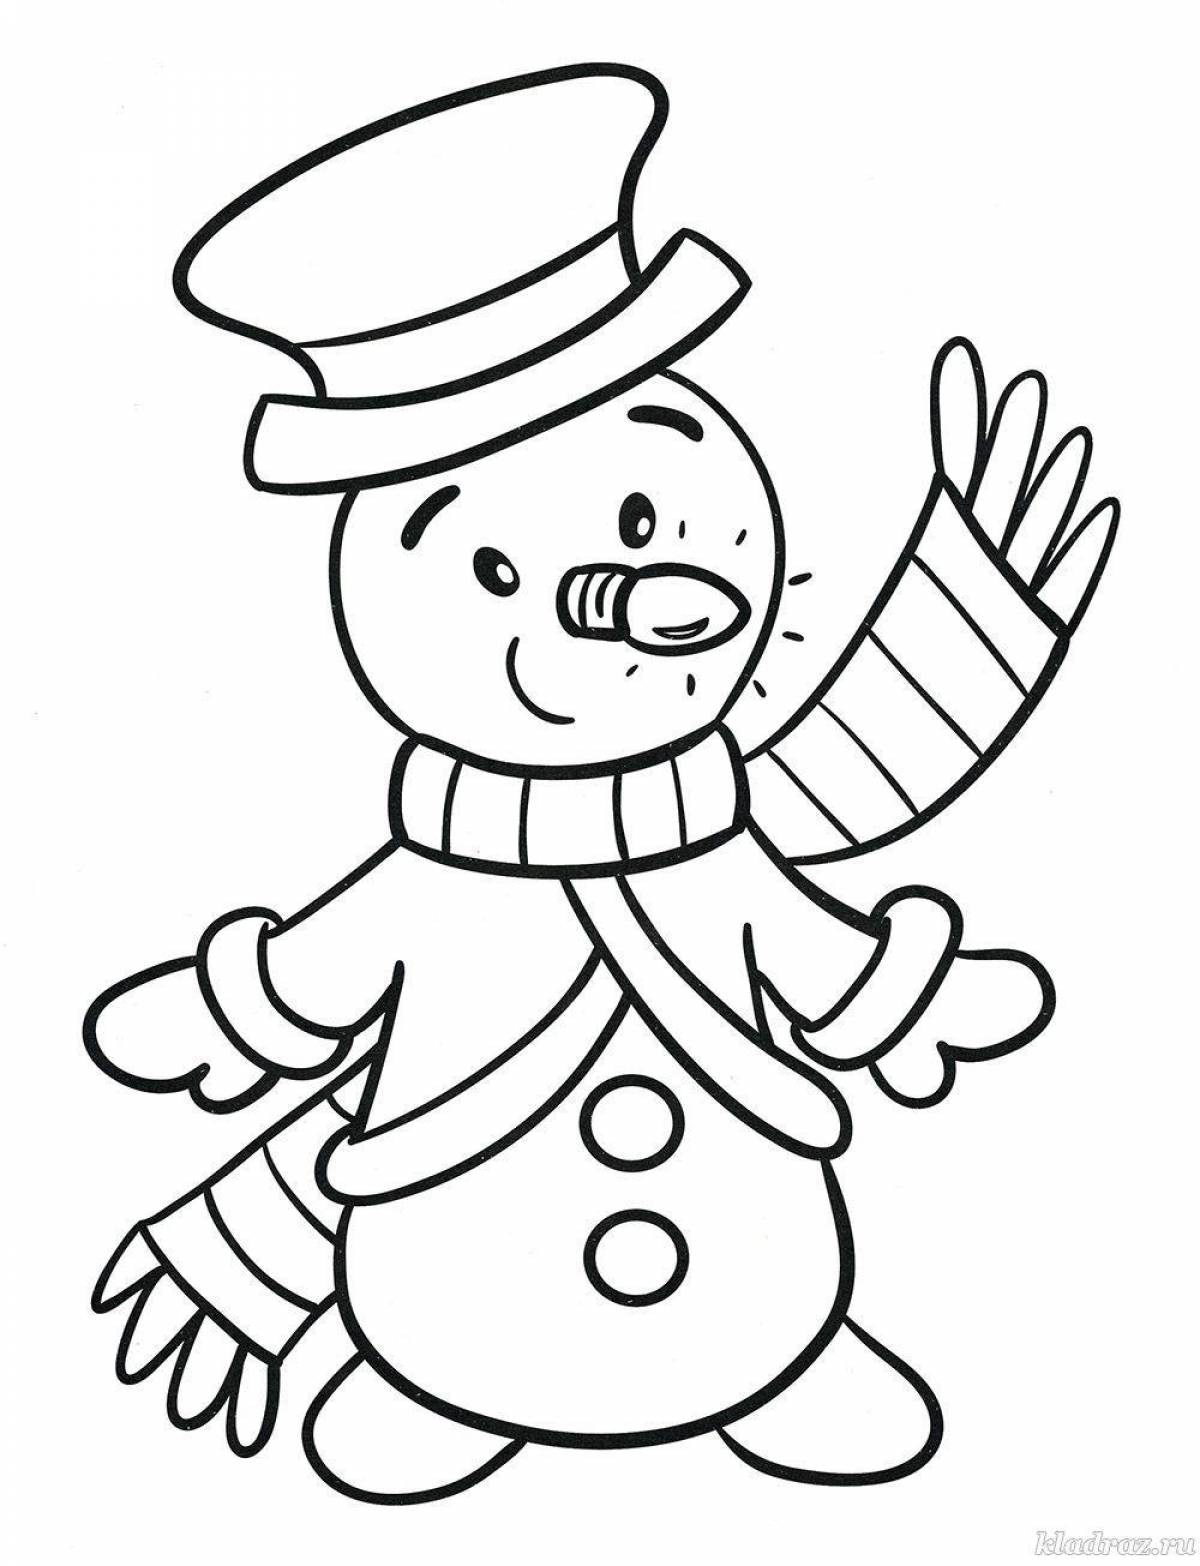 Snowman for children 3 4 years old #3